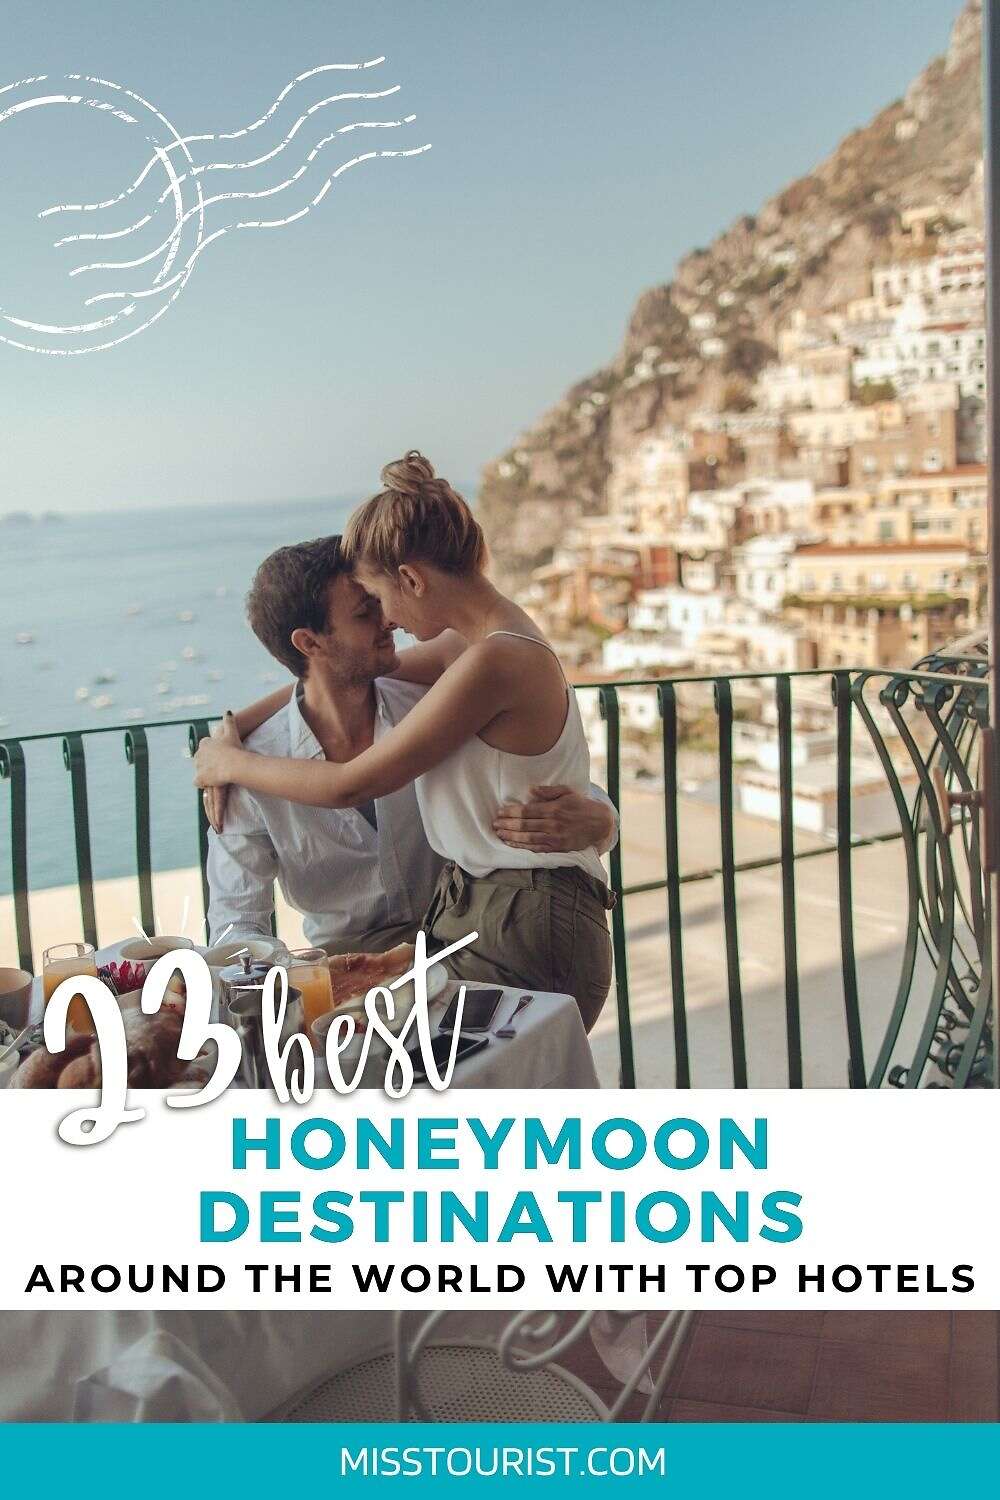 A couple sits at a table on a balcony with a scenic view of hillside buildings at a coastal location. Text overlay reads "13 Best Honeymoon Destinations Around the World with Top Hotels, misstourist.com.